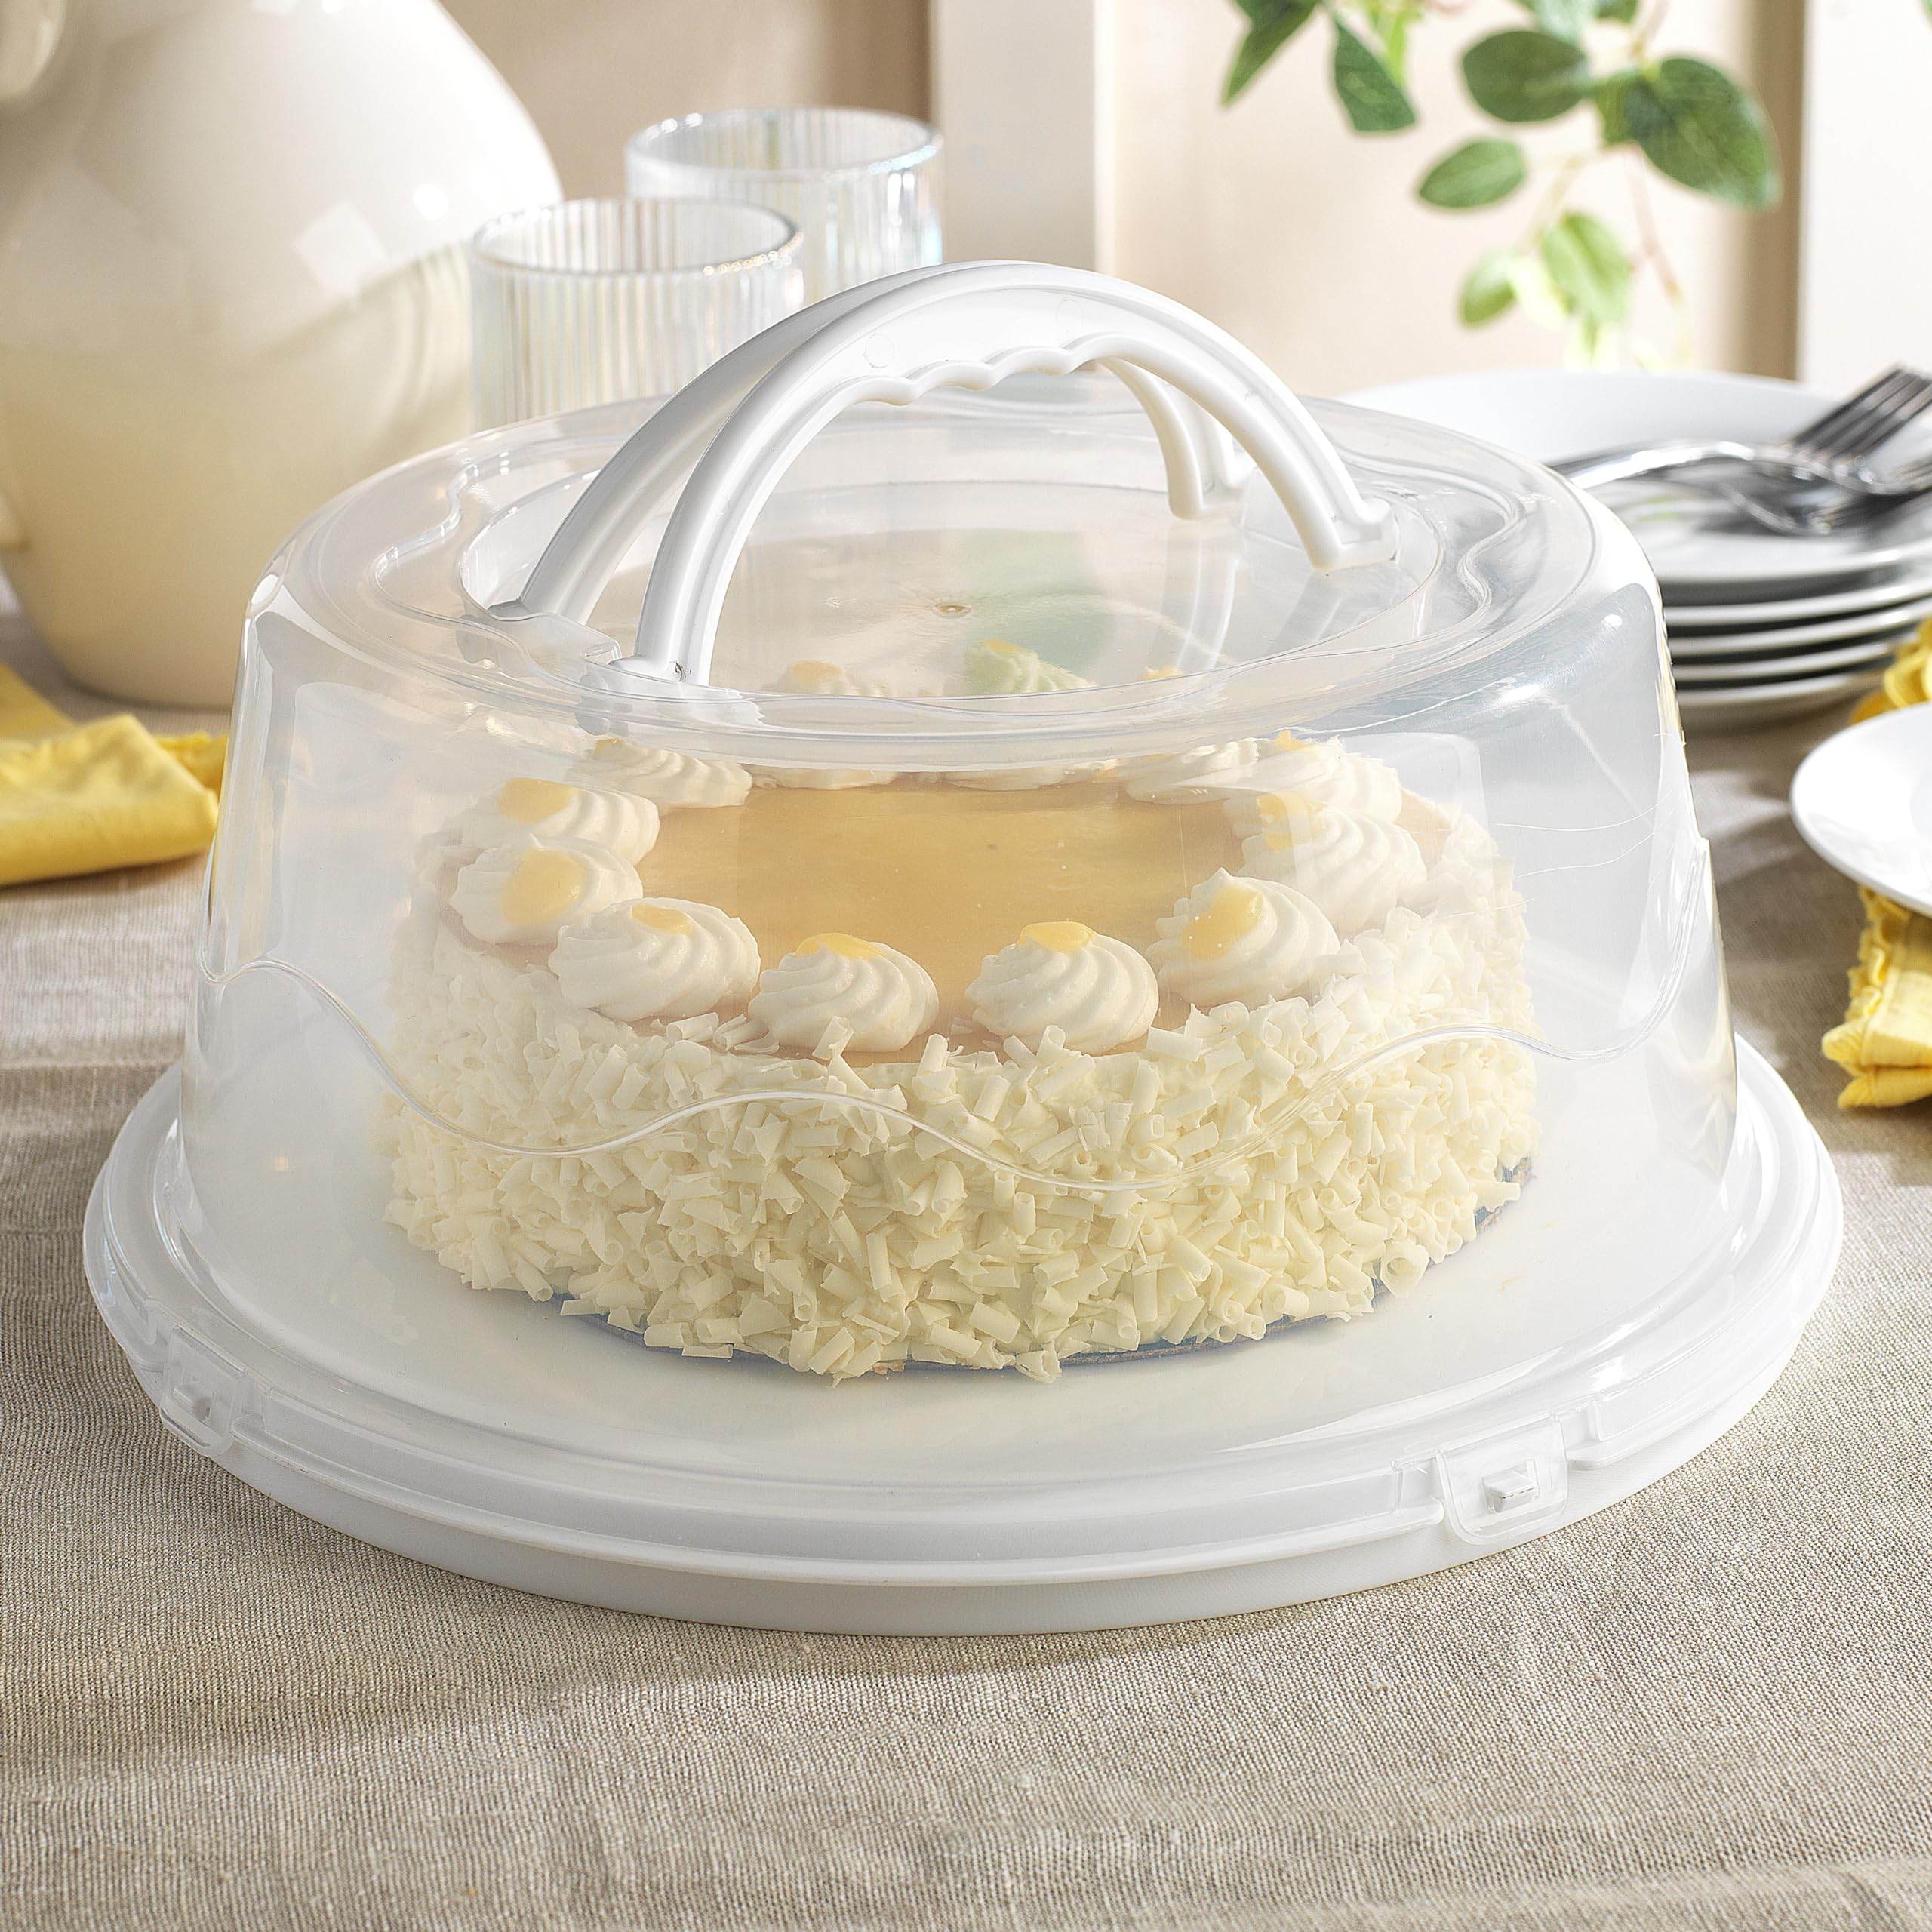 MosJos Round Cake Carrier, BPA-Free Plastic Cake Keeper with Lid, Fits 10� Cakes, Four Secure Side Closures, Dishwasher Safe Cake Transport Container (White)  - Very Good